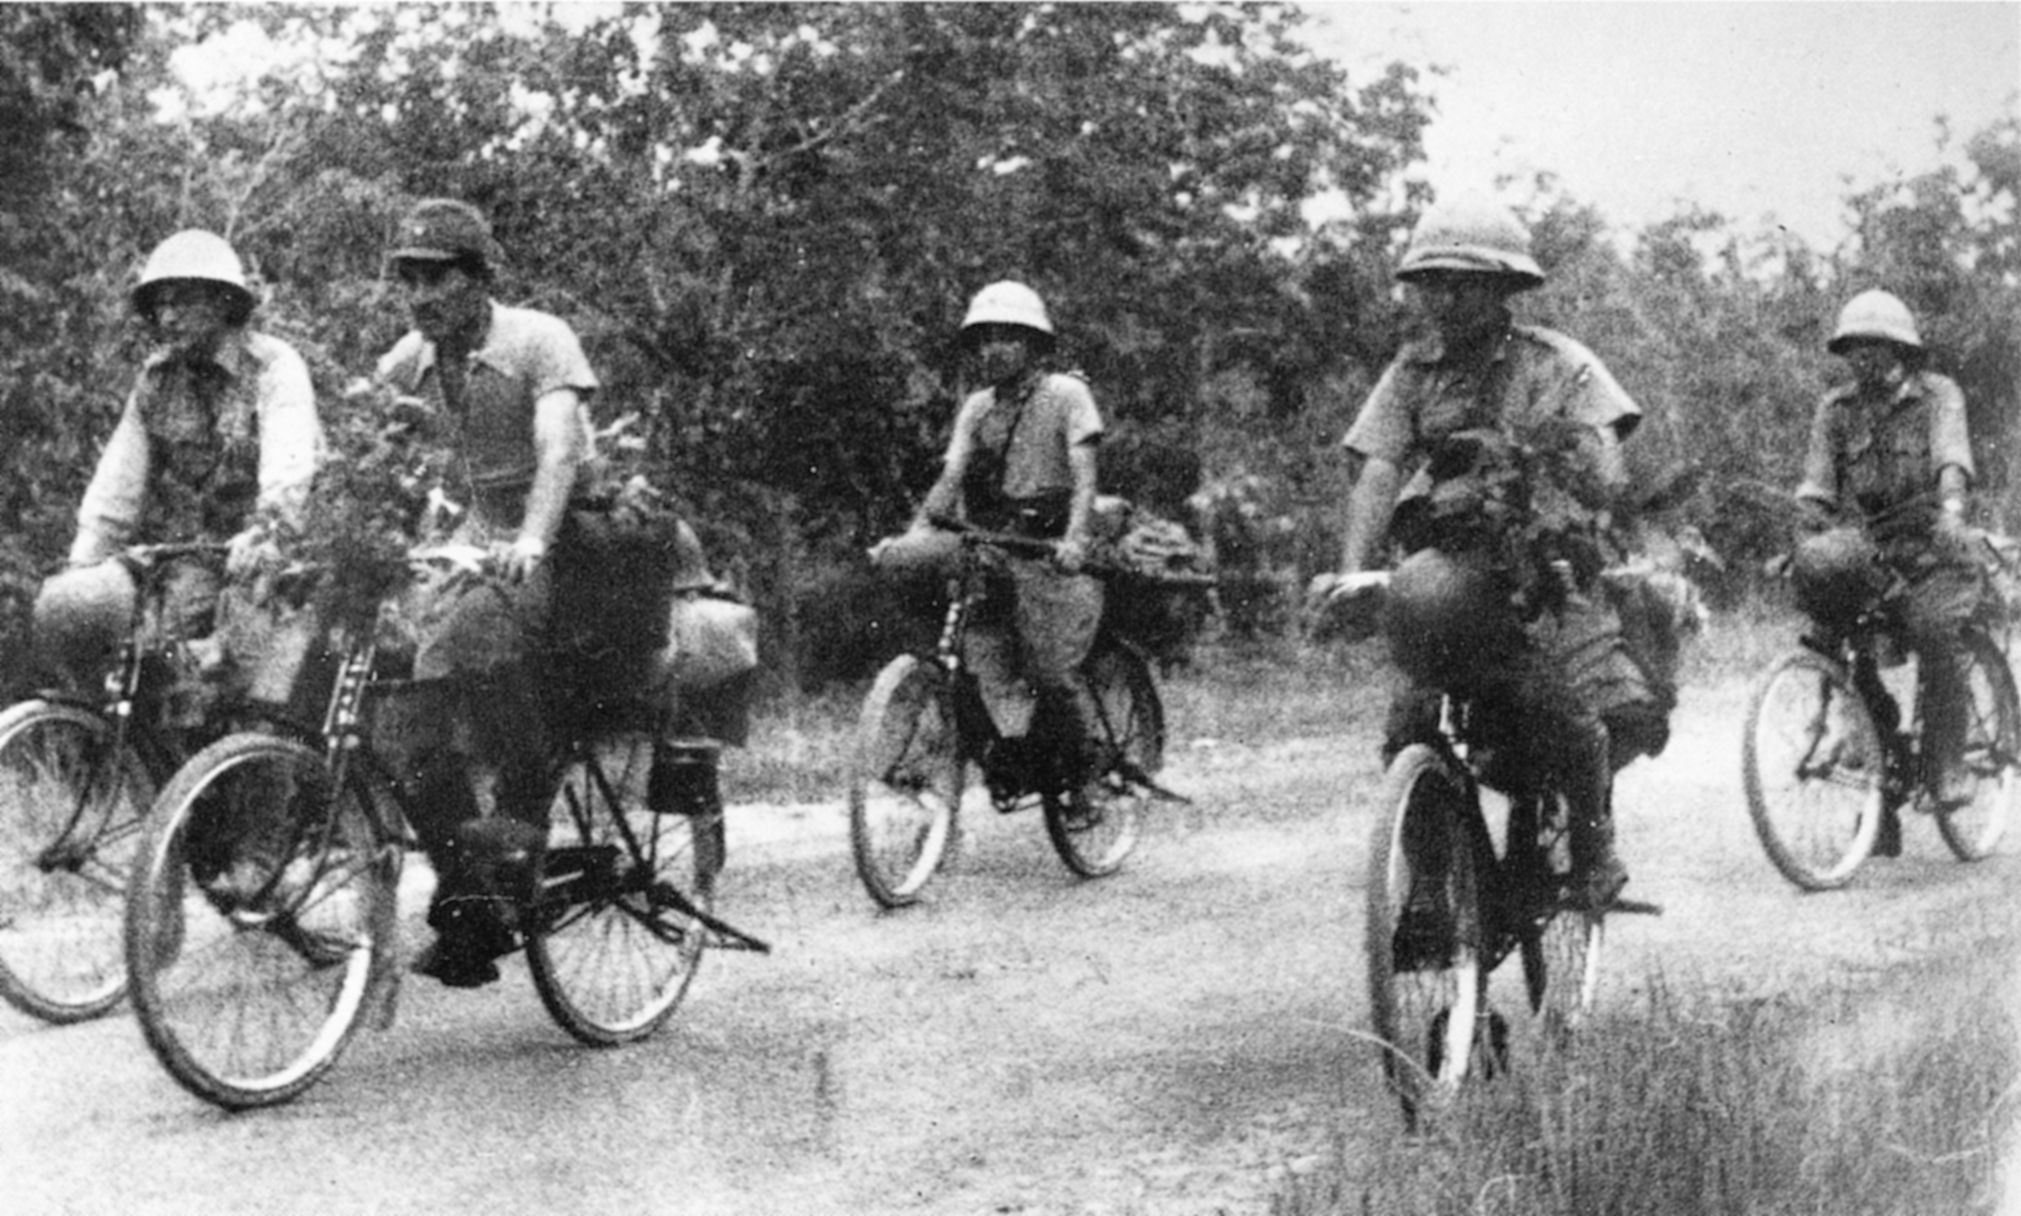 Inexorably advancing Japanese troops ride bicycles in Malaysia in 1941. Thousands poured into Singapore on such bicycles.